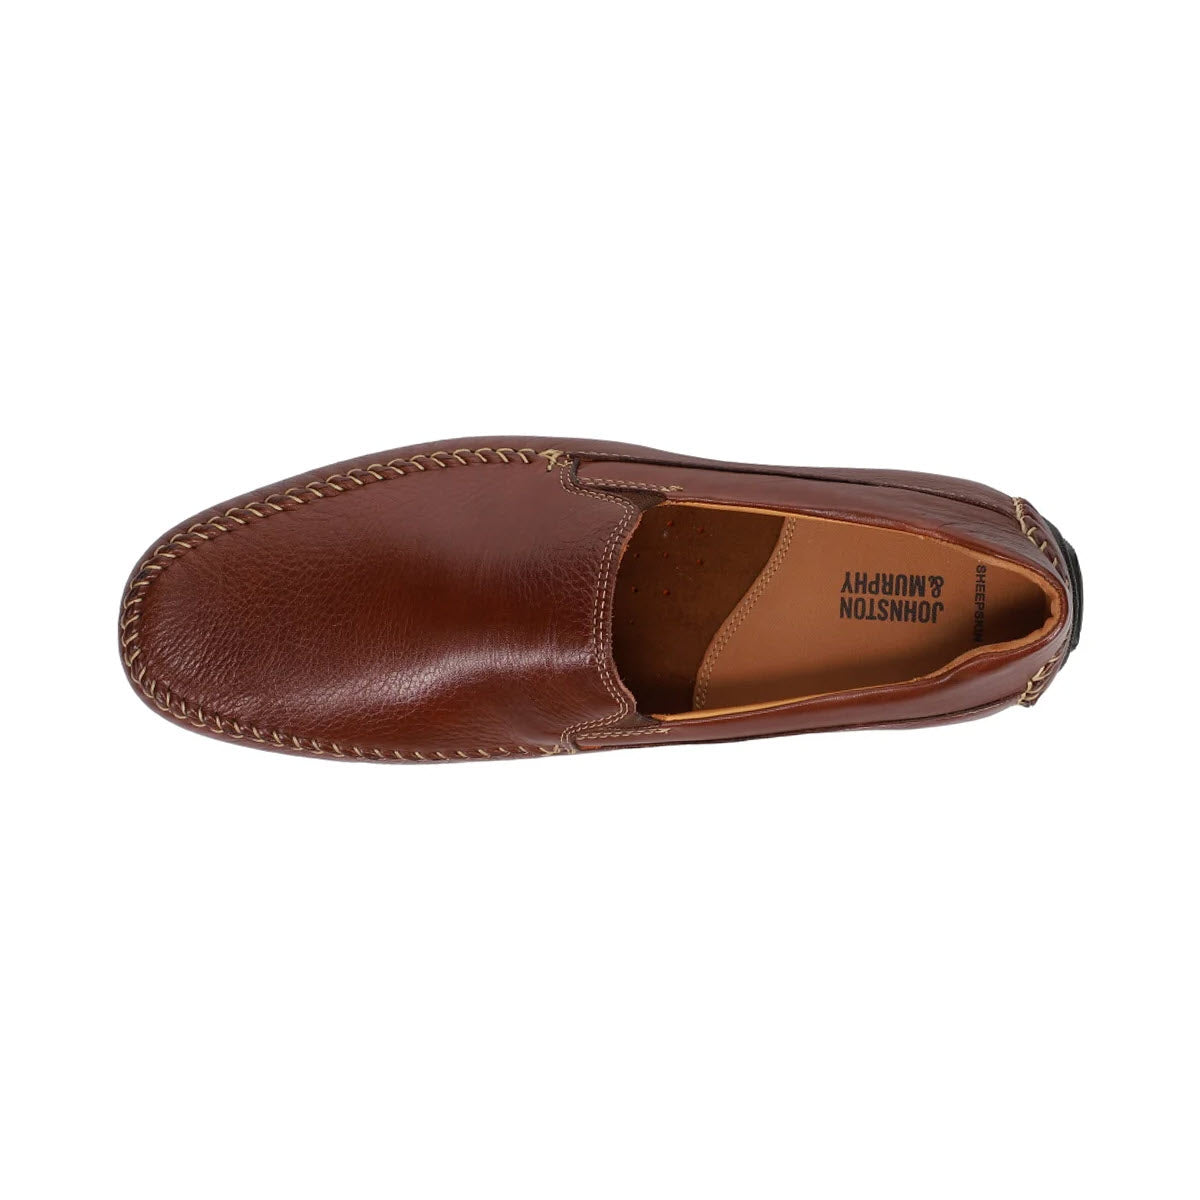 Top view of a single Johnston &amp; Murphy Cort Whipstitch Venetian Mahogany leather loafer featuring genuine moccasin construction and visible brand label inside.